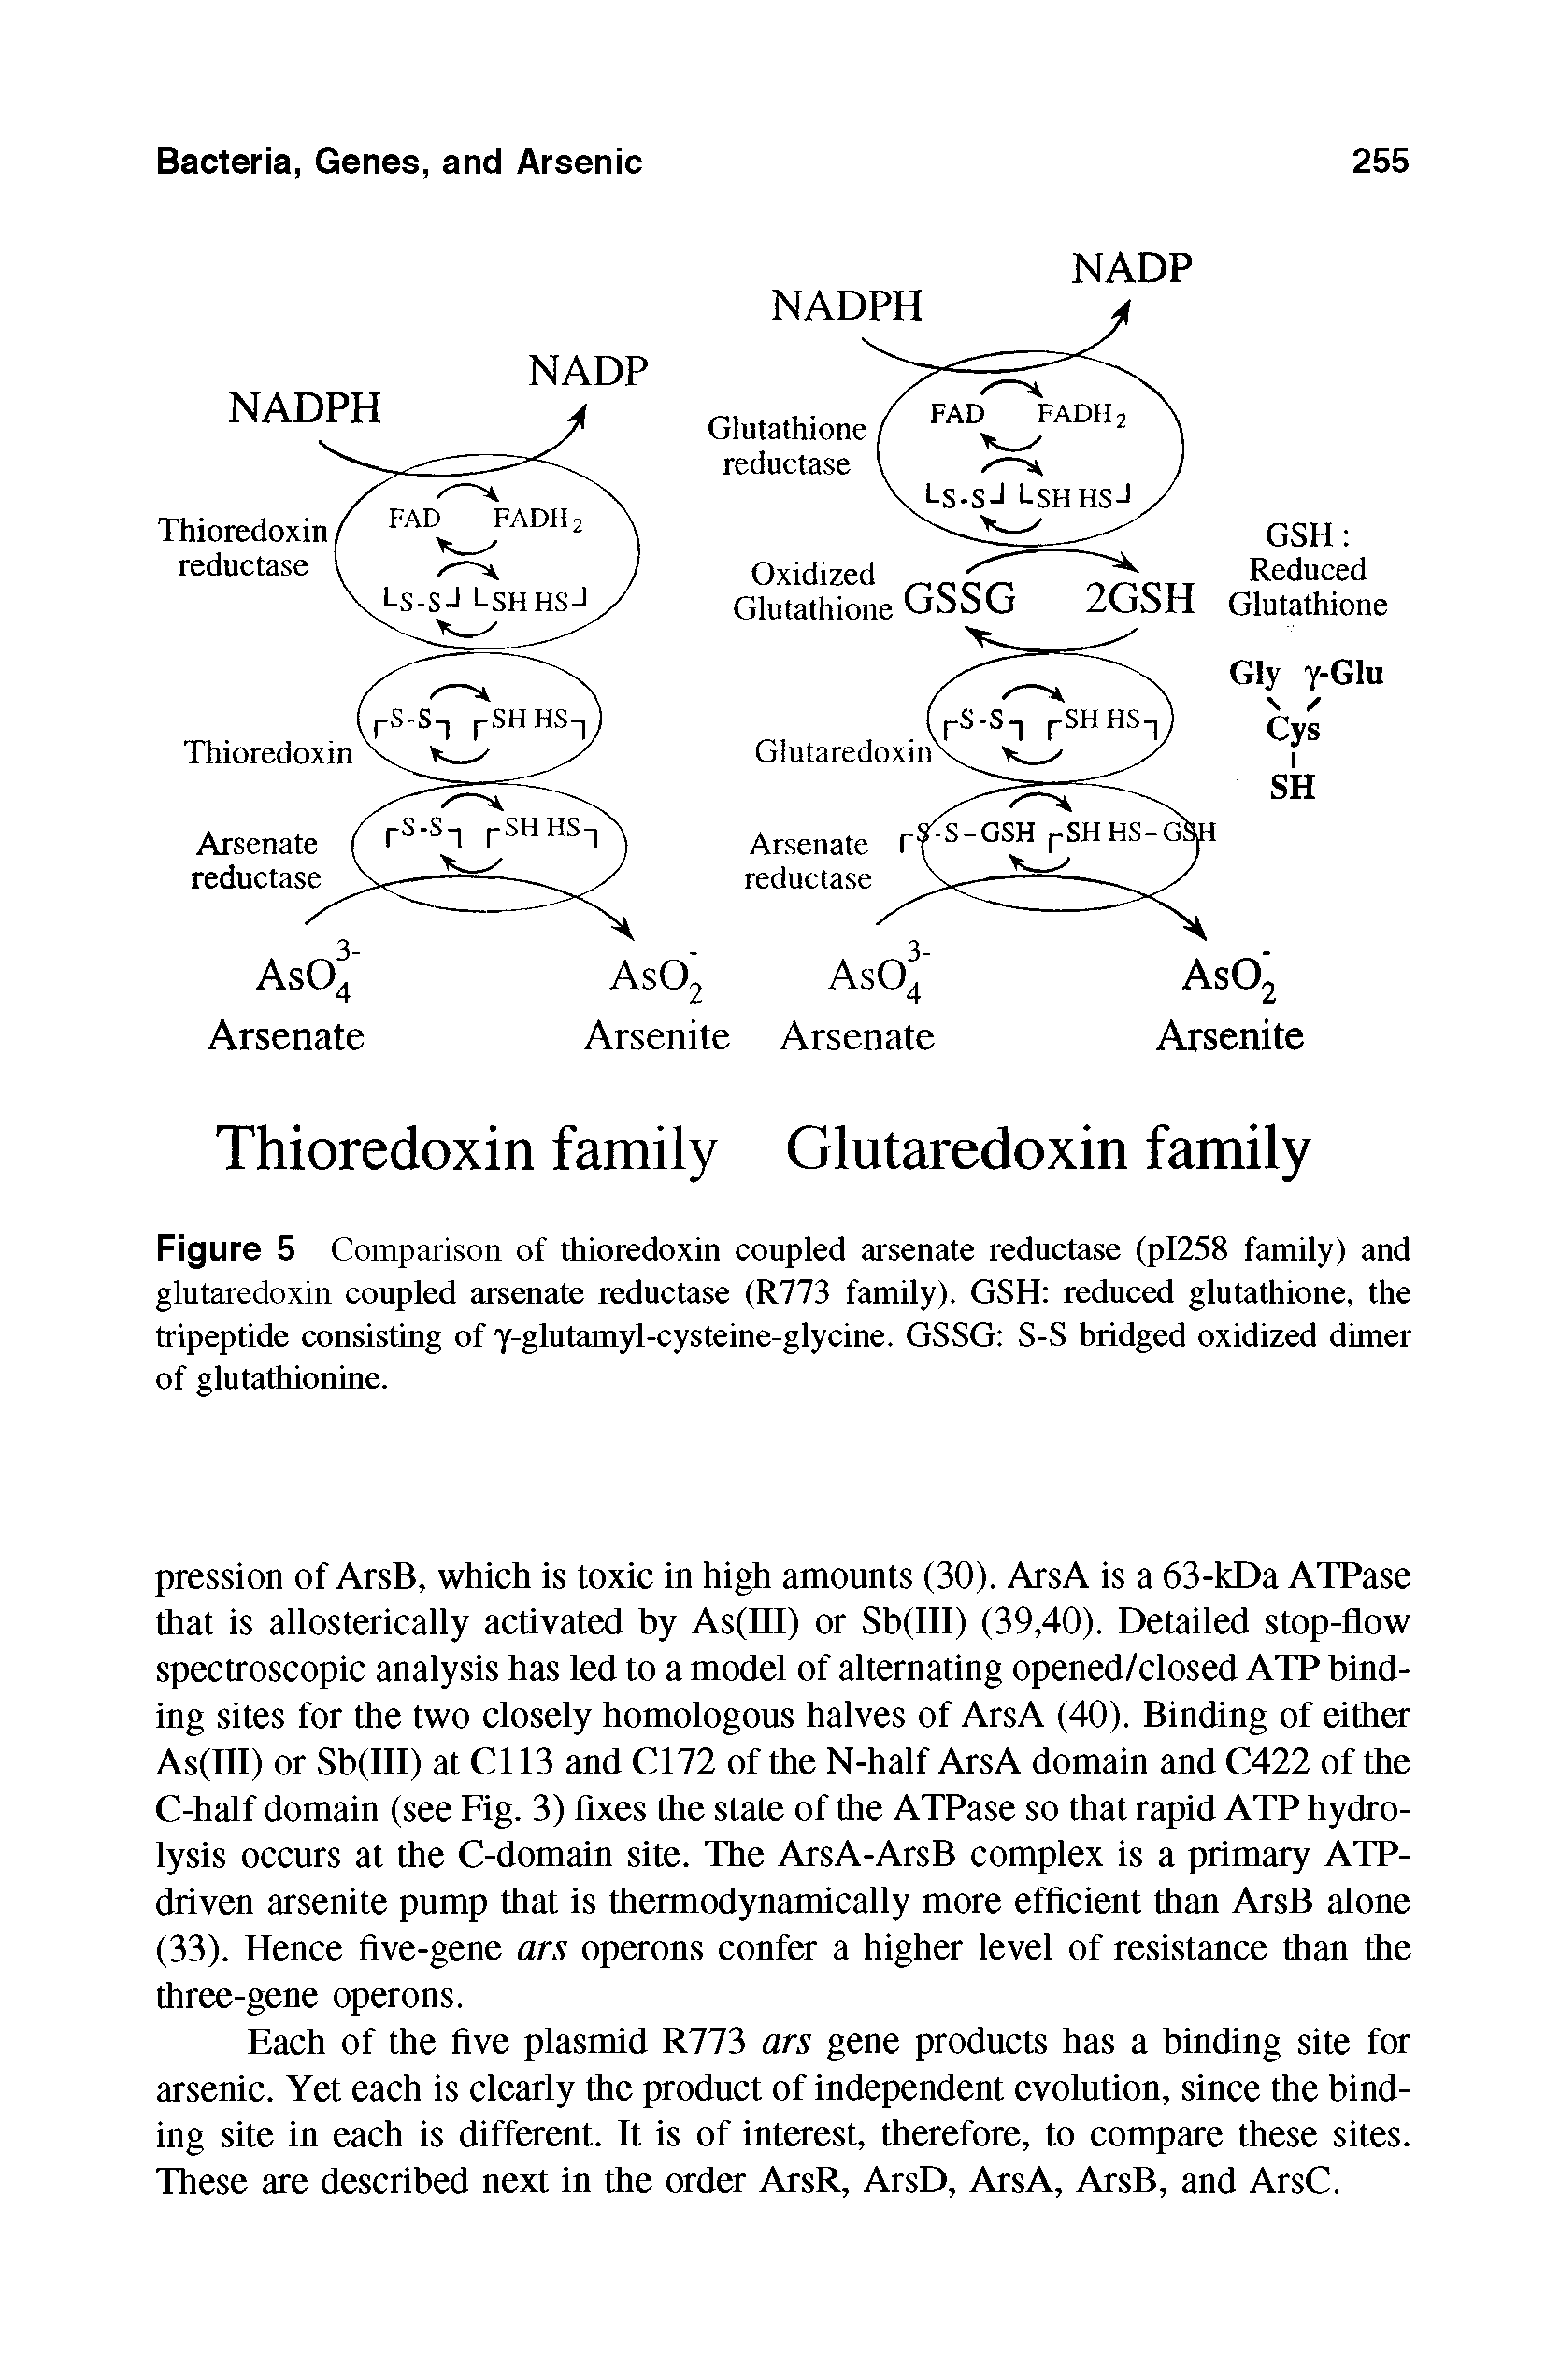 Figure 5 Comparison of thioredoxin coupled arsenate reductase (pI258 family) and glutaredoxin coupled arsenate reductase (R773 family). GSH reduced glutathione, the tripeptide consisting of y-glutamyl-cysteine-glycine. GSSG S-S bridged oxidized dimer of glutathionine.